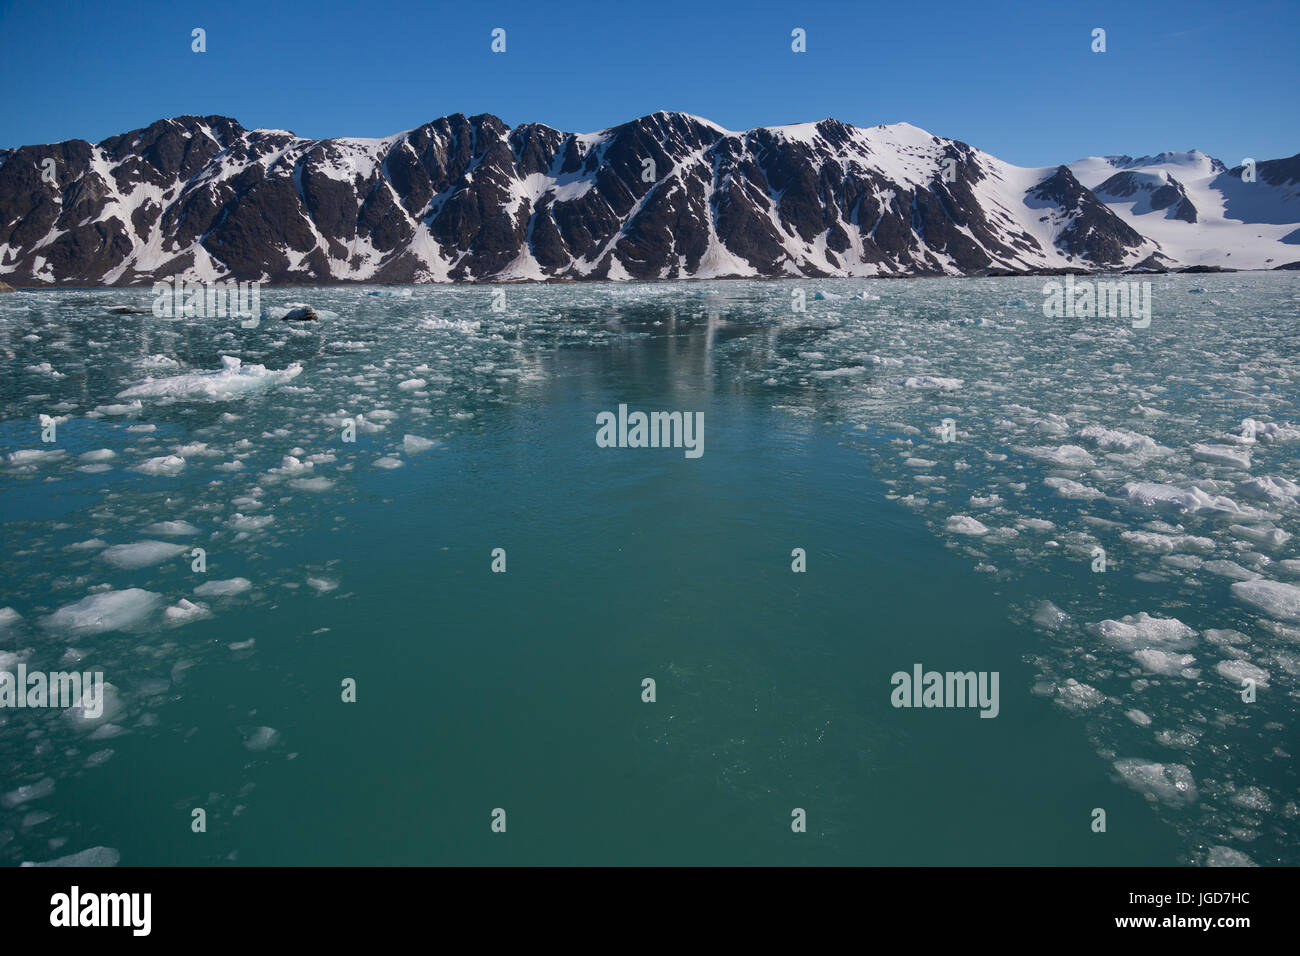 The still, clear water of a bay at the tongue of a glacier is speckled with floating fragments of ice from a recent calving event, with a path swept clear by a boat. Stock Photo